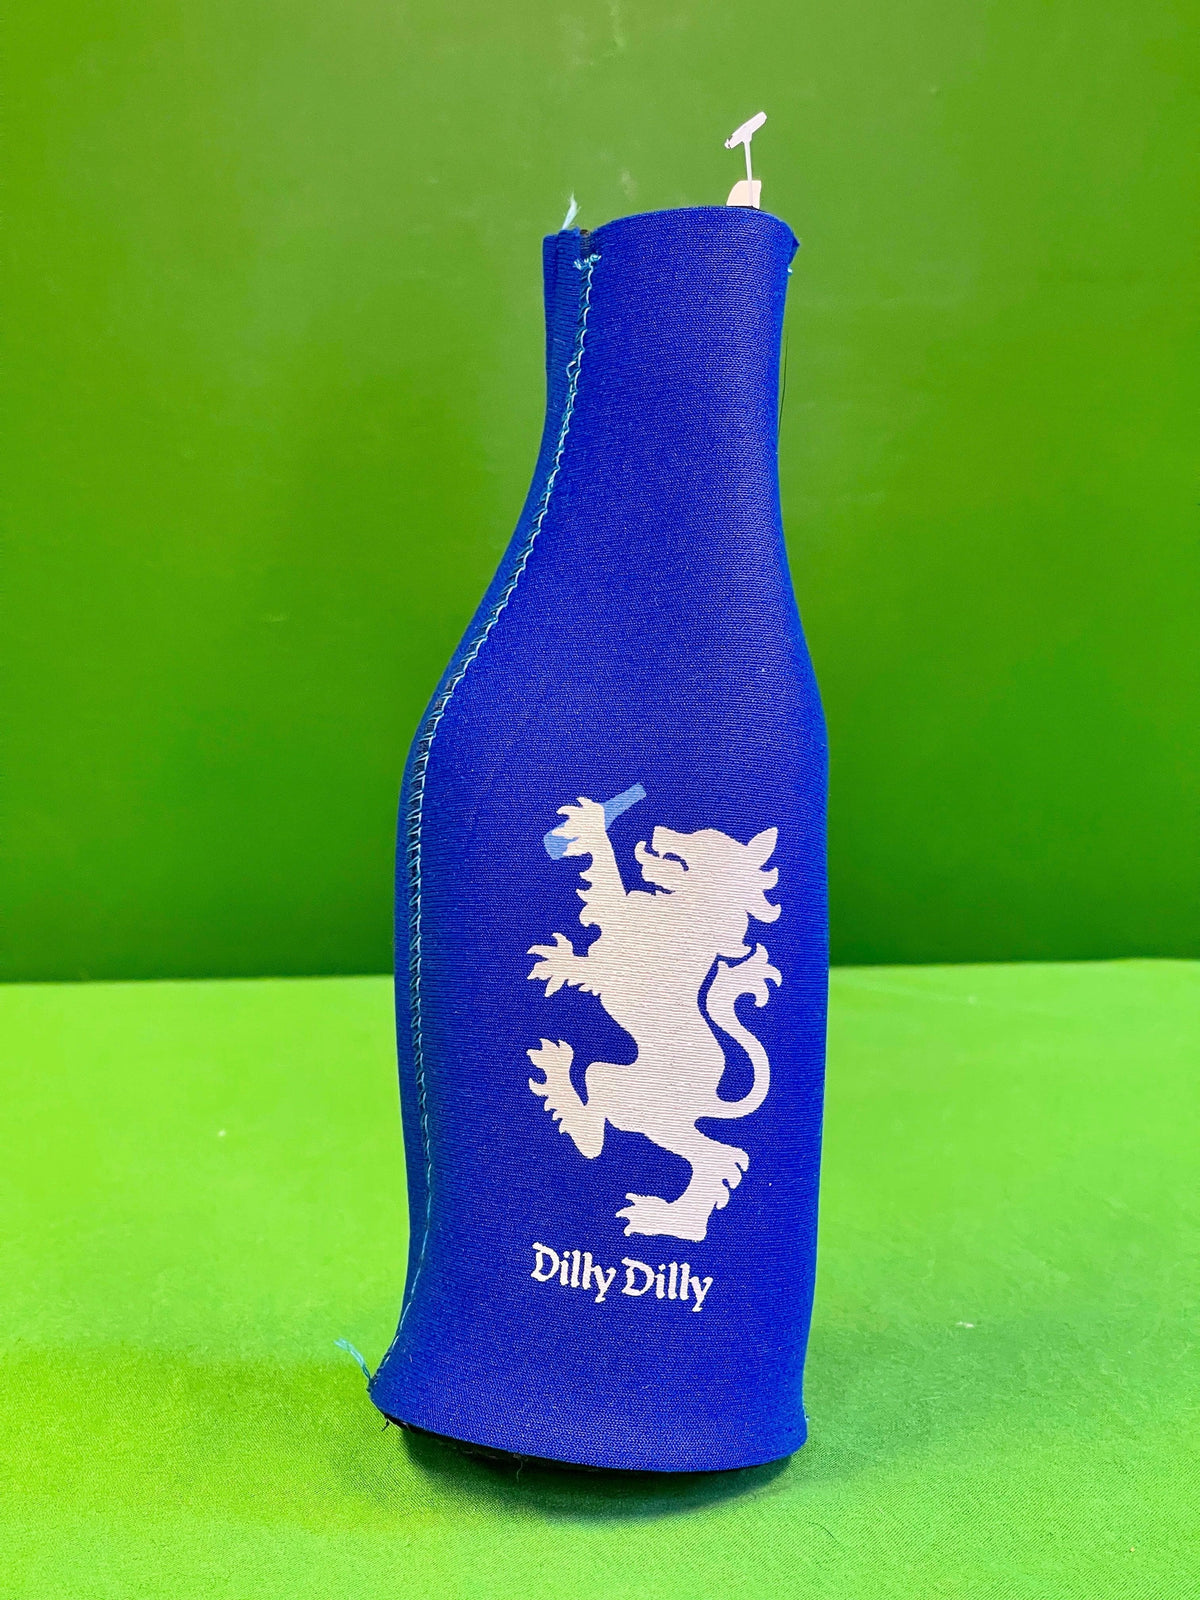 NFL Bud Light "Dilly Dilly" Bottle Cooler Cosy Jersey Neoprene NWT